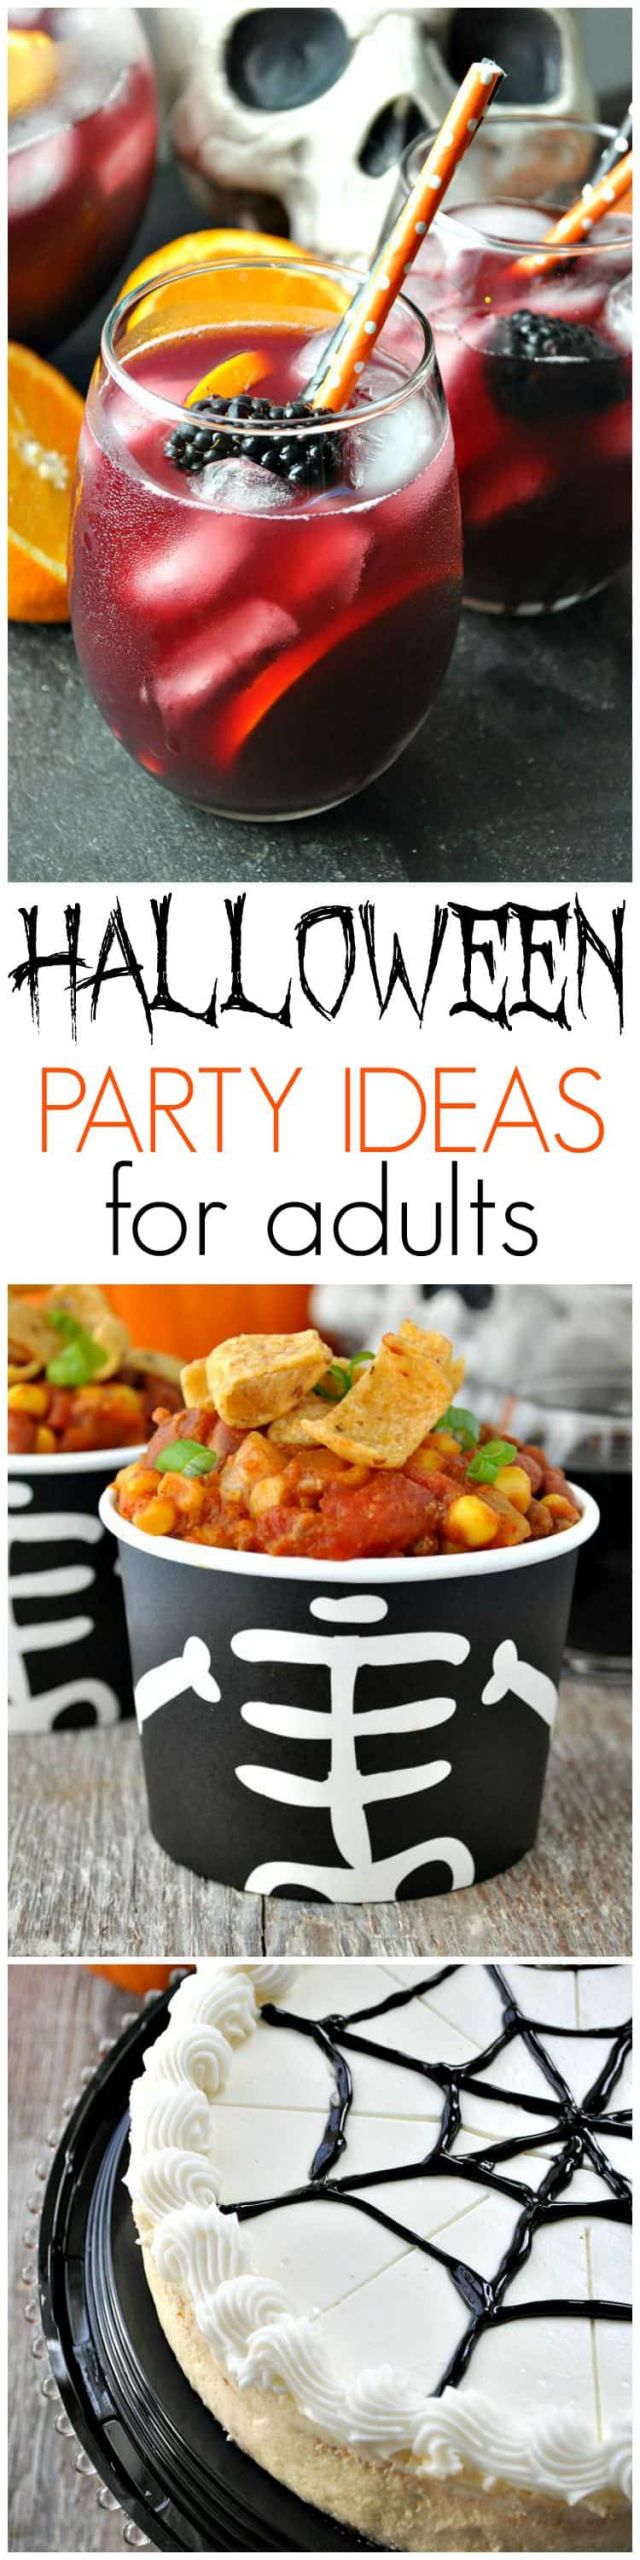 Halloween Party Ideas For Seniors
 Slow Cooker Pumpkin Chili Halloween Party Ideas for